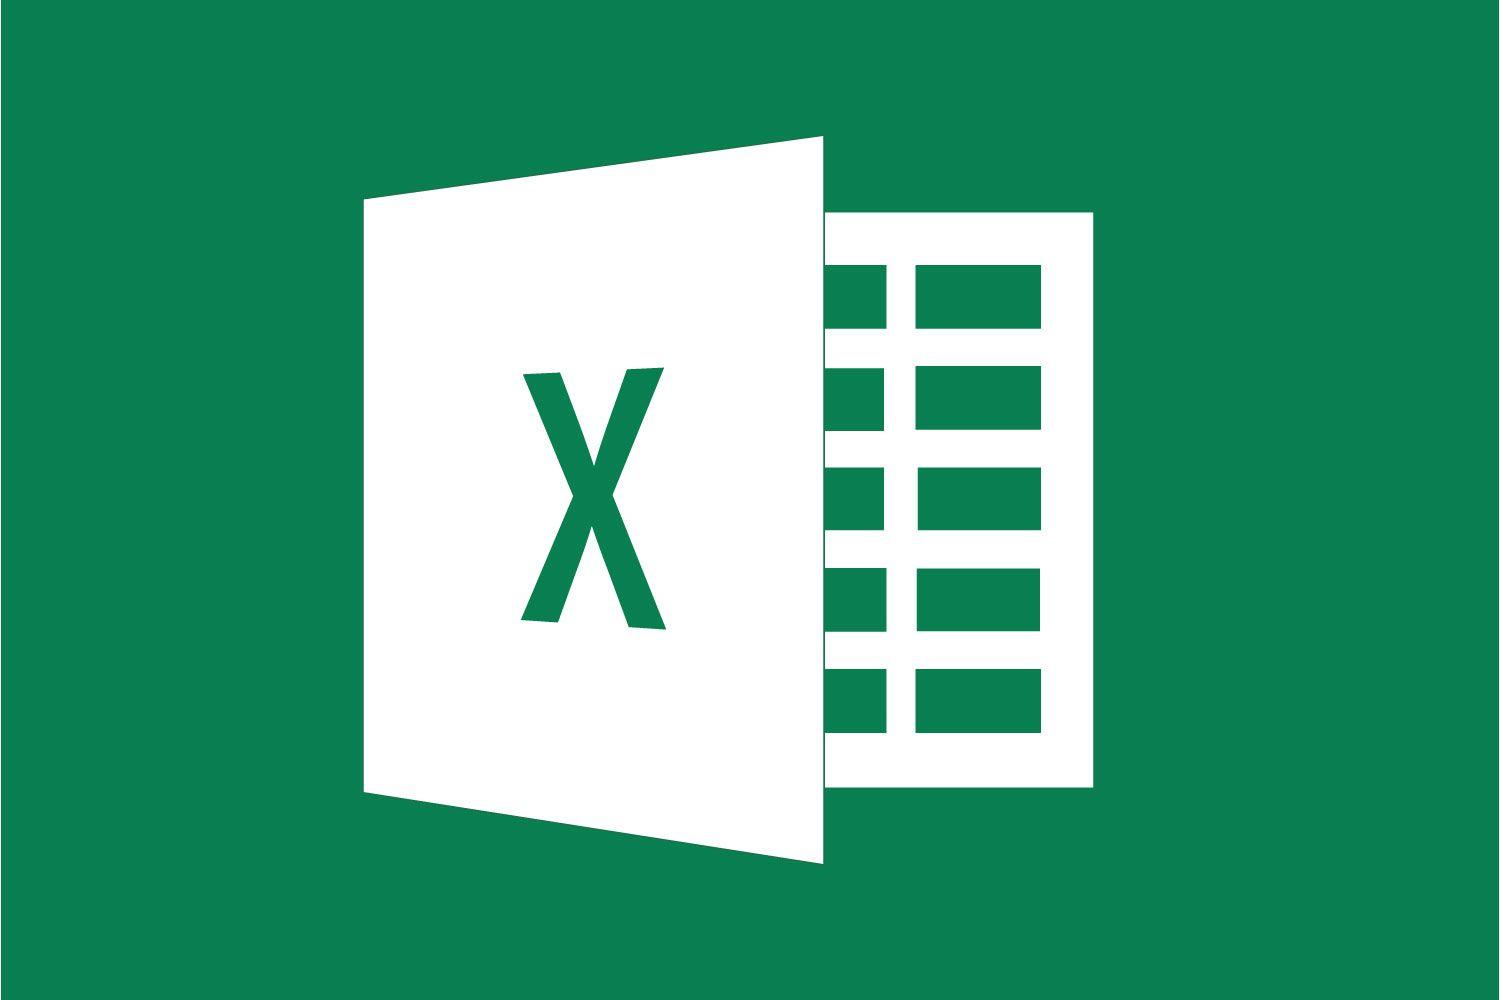 Microsoft Excel 2016 Logo - Microsoft Excel 2016 (Part 2) - Cudoo - When you learn, the world learns